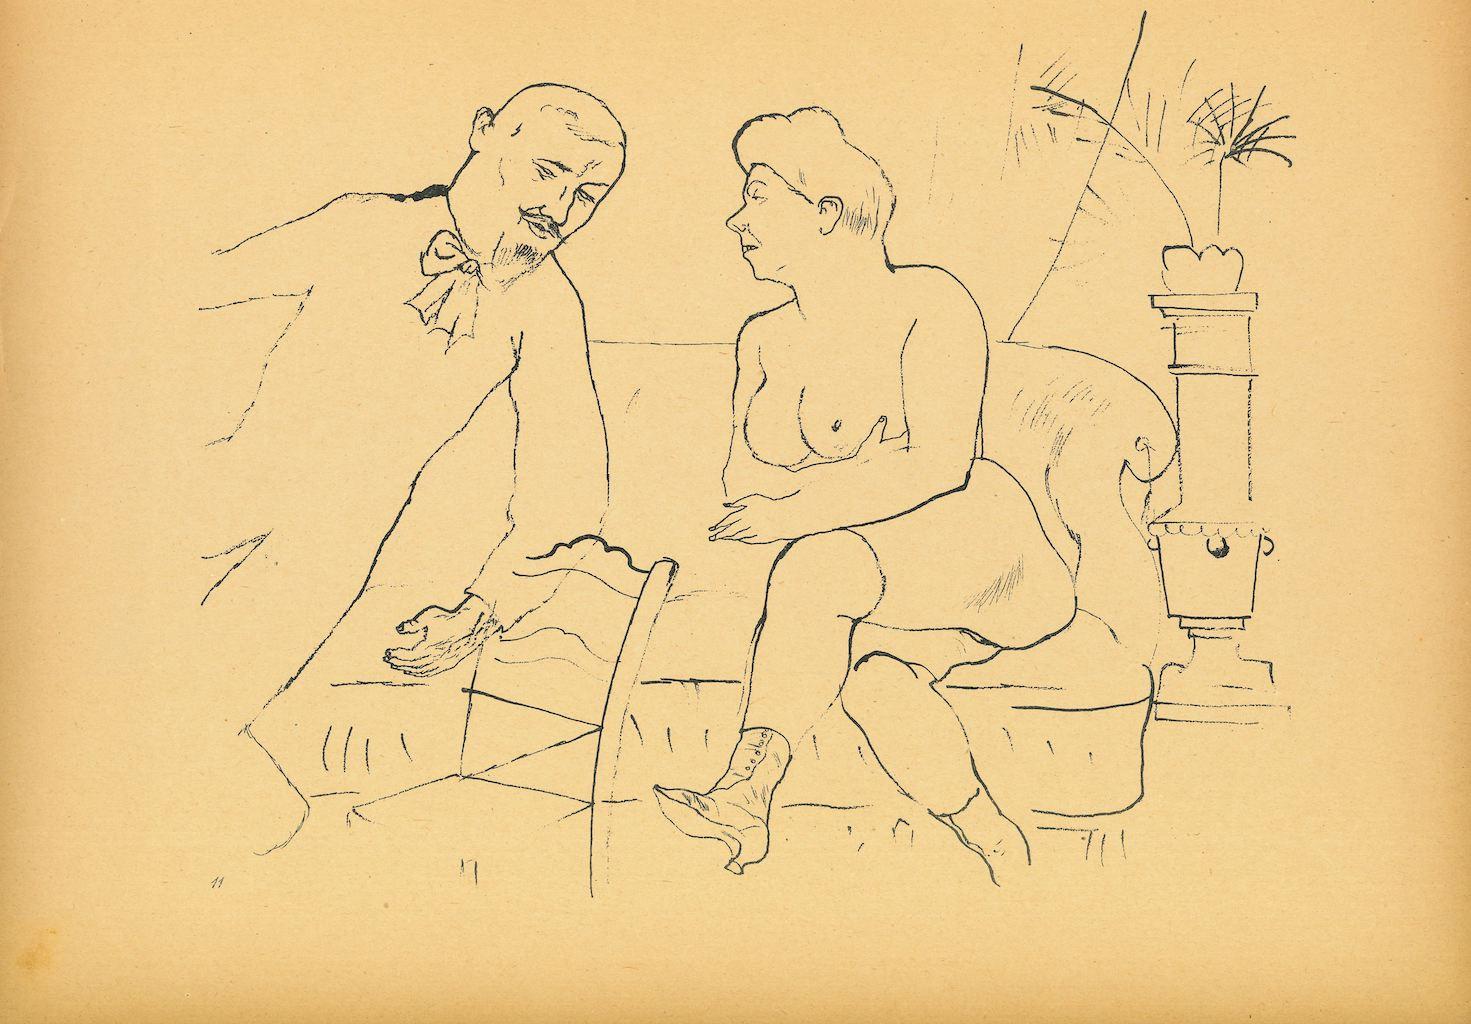 The Visit - Original Offset and Lithograph by George Grosz - 1923